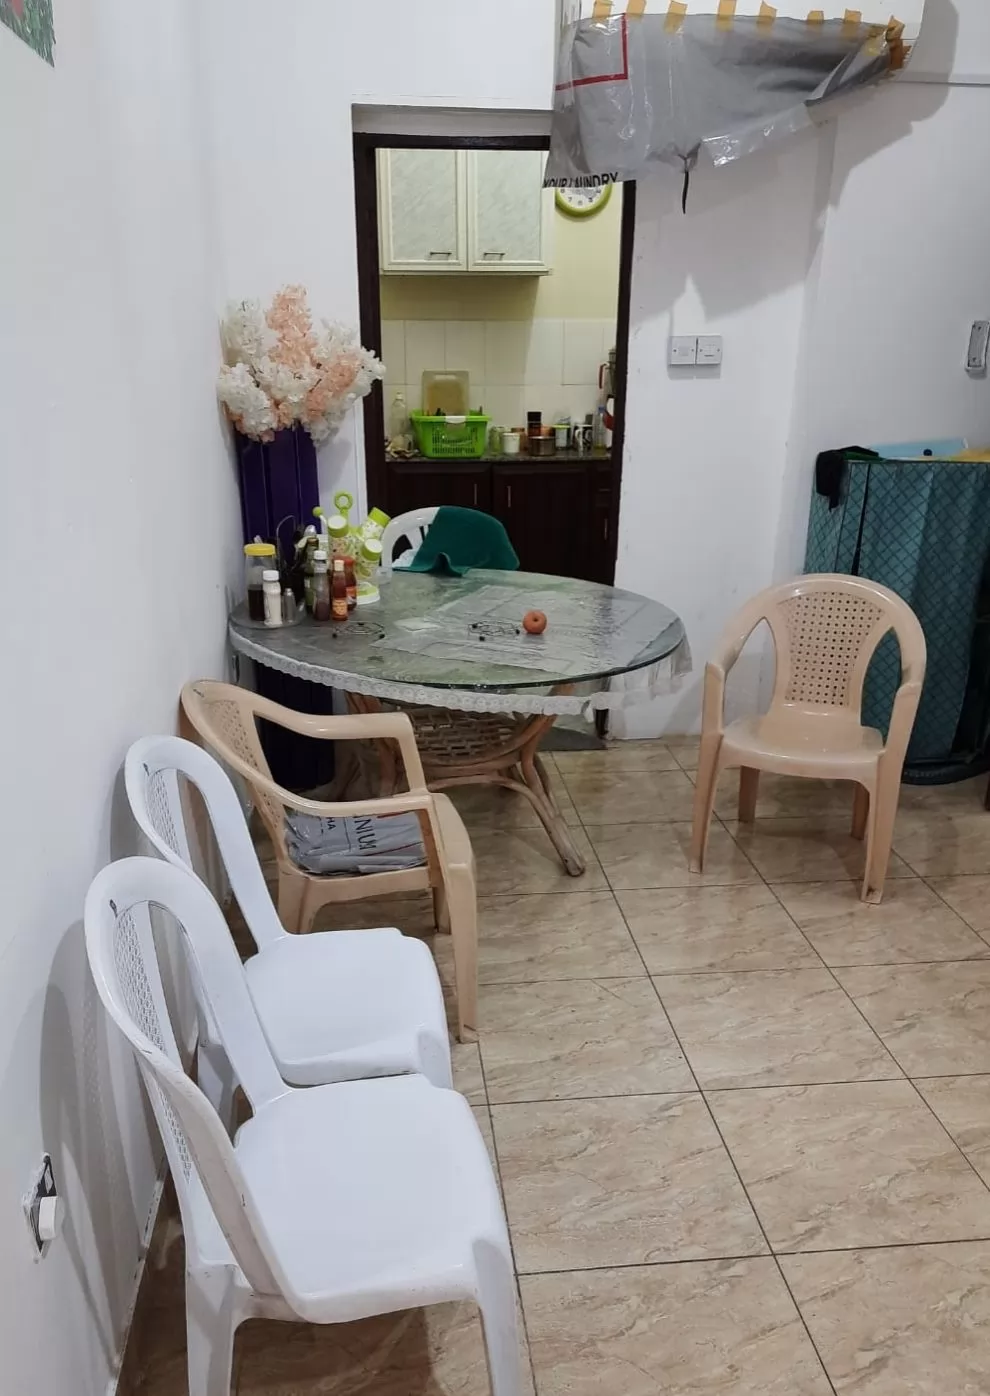 Residential Ready Property 1 Bedroom F/F Apartment  for rent in Al-Hilal , Doha-Qatar #16843 - 1  image 